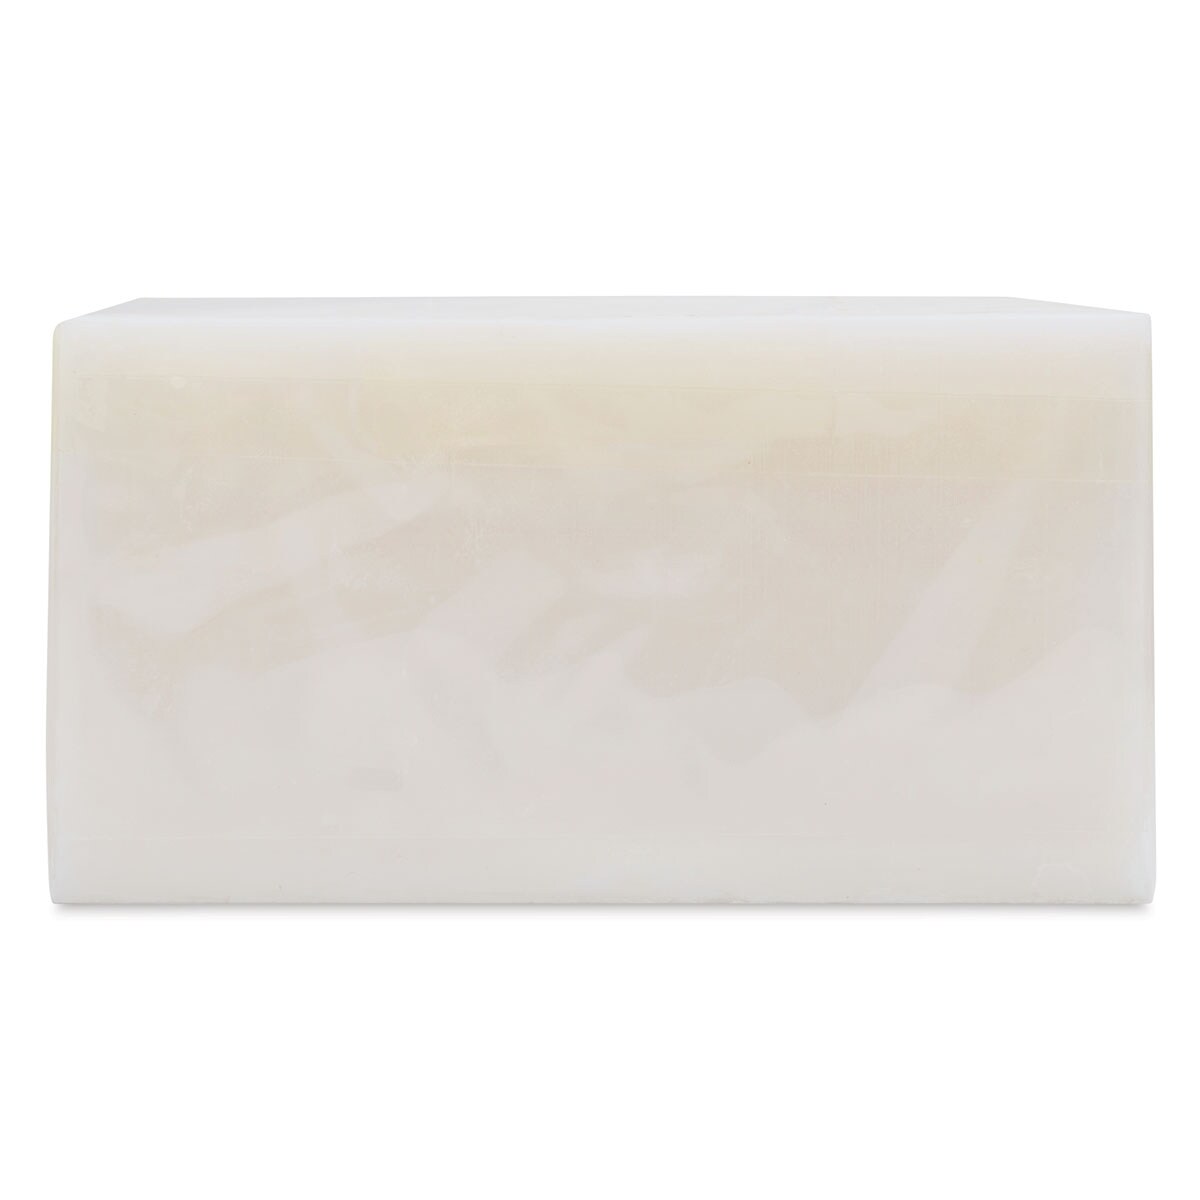 We R Memory Keepers Suds Soap Base - White, 2 lb